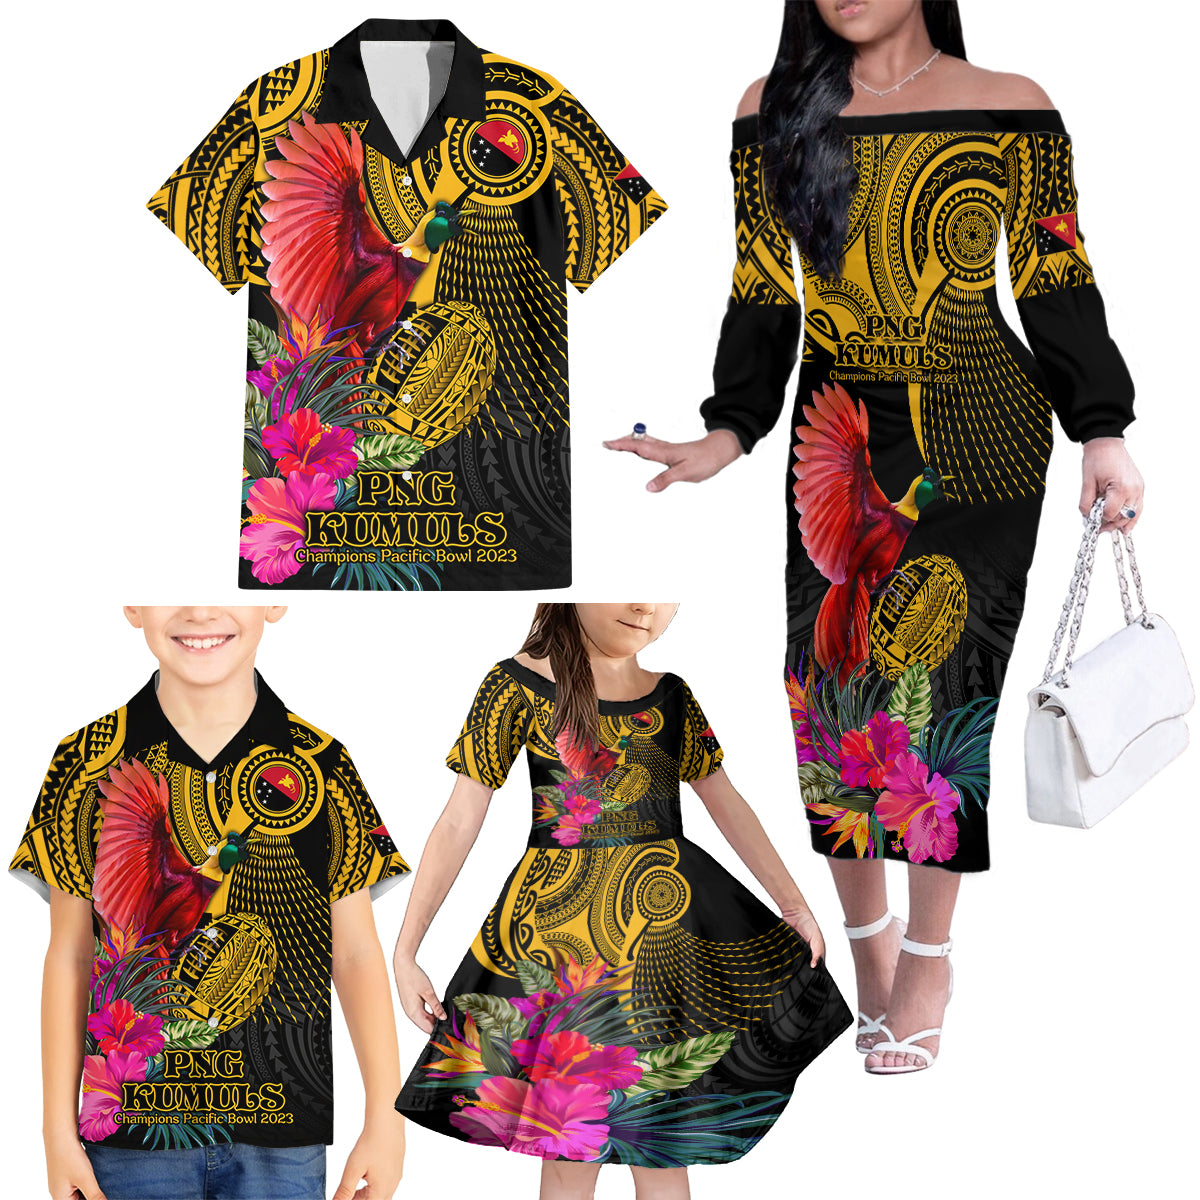 Personalised Papua New Guinea Rugby Family Matching Off Shoulder Long Sleeve Dress and Hawaiian Shirt PNG Kumuls Champions Pacific Bowl LT9 - Polynesian Pride